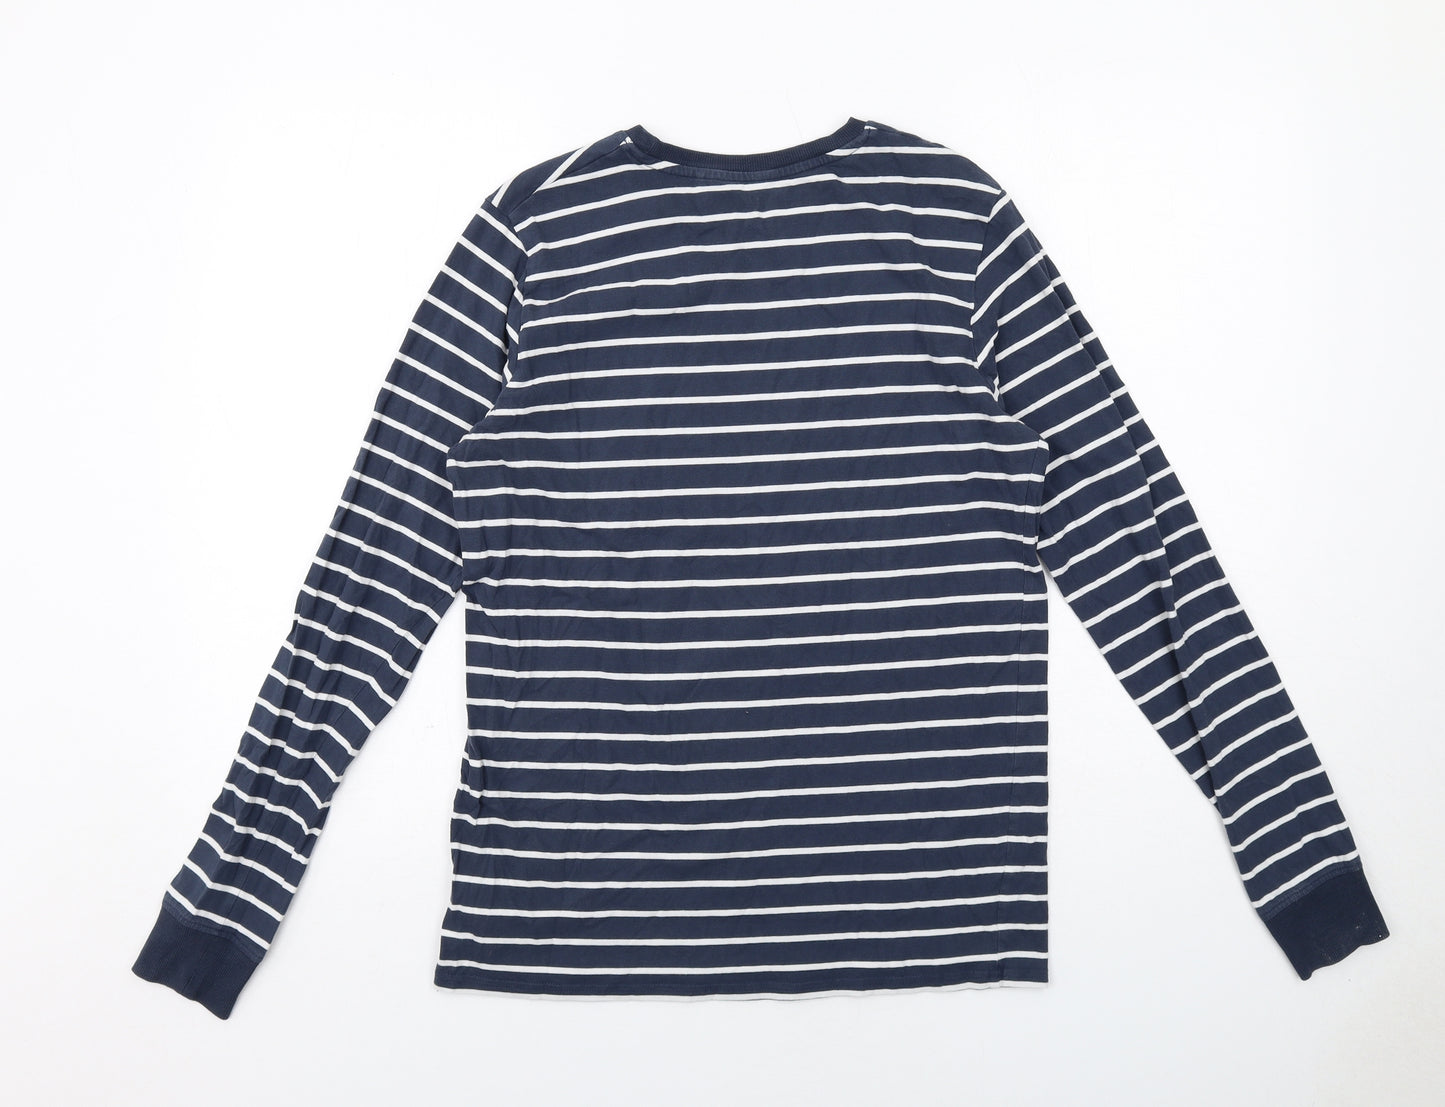 NEXT Boys Blue Striped Cotton Pullover Casual Size 16 Years Round Neck Pullover